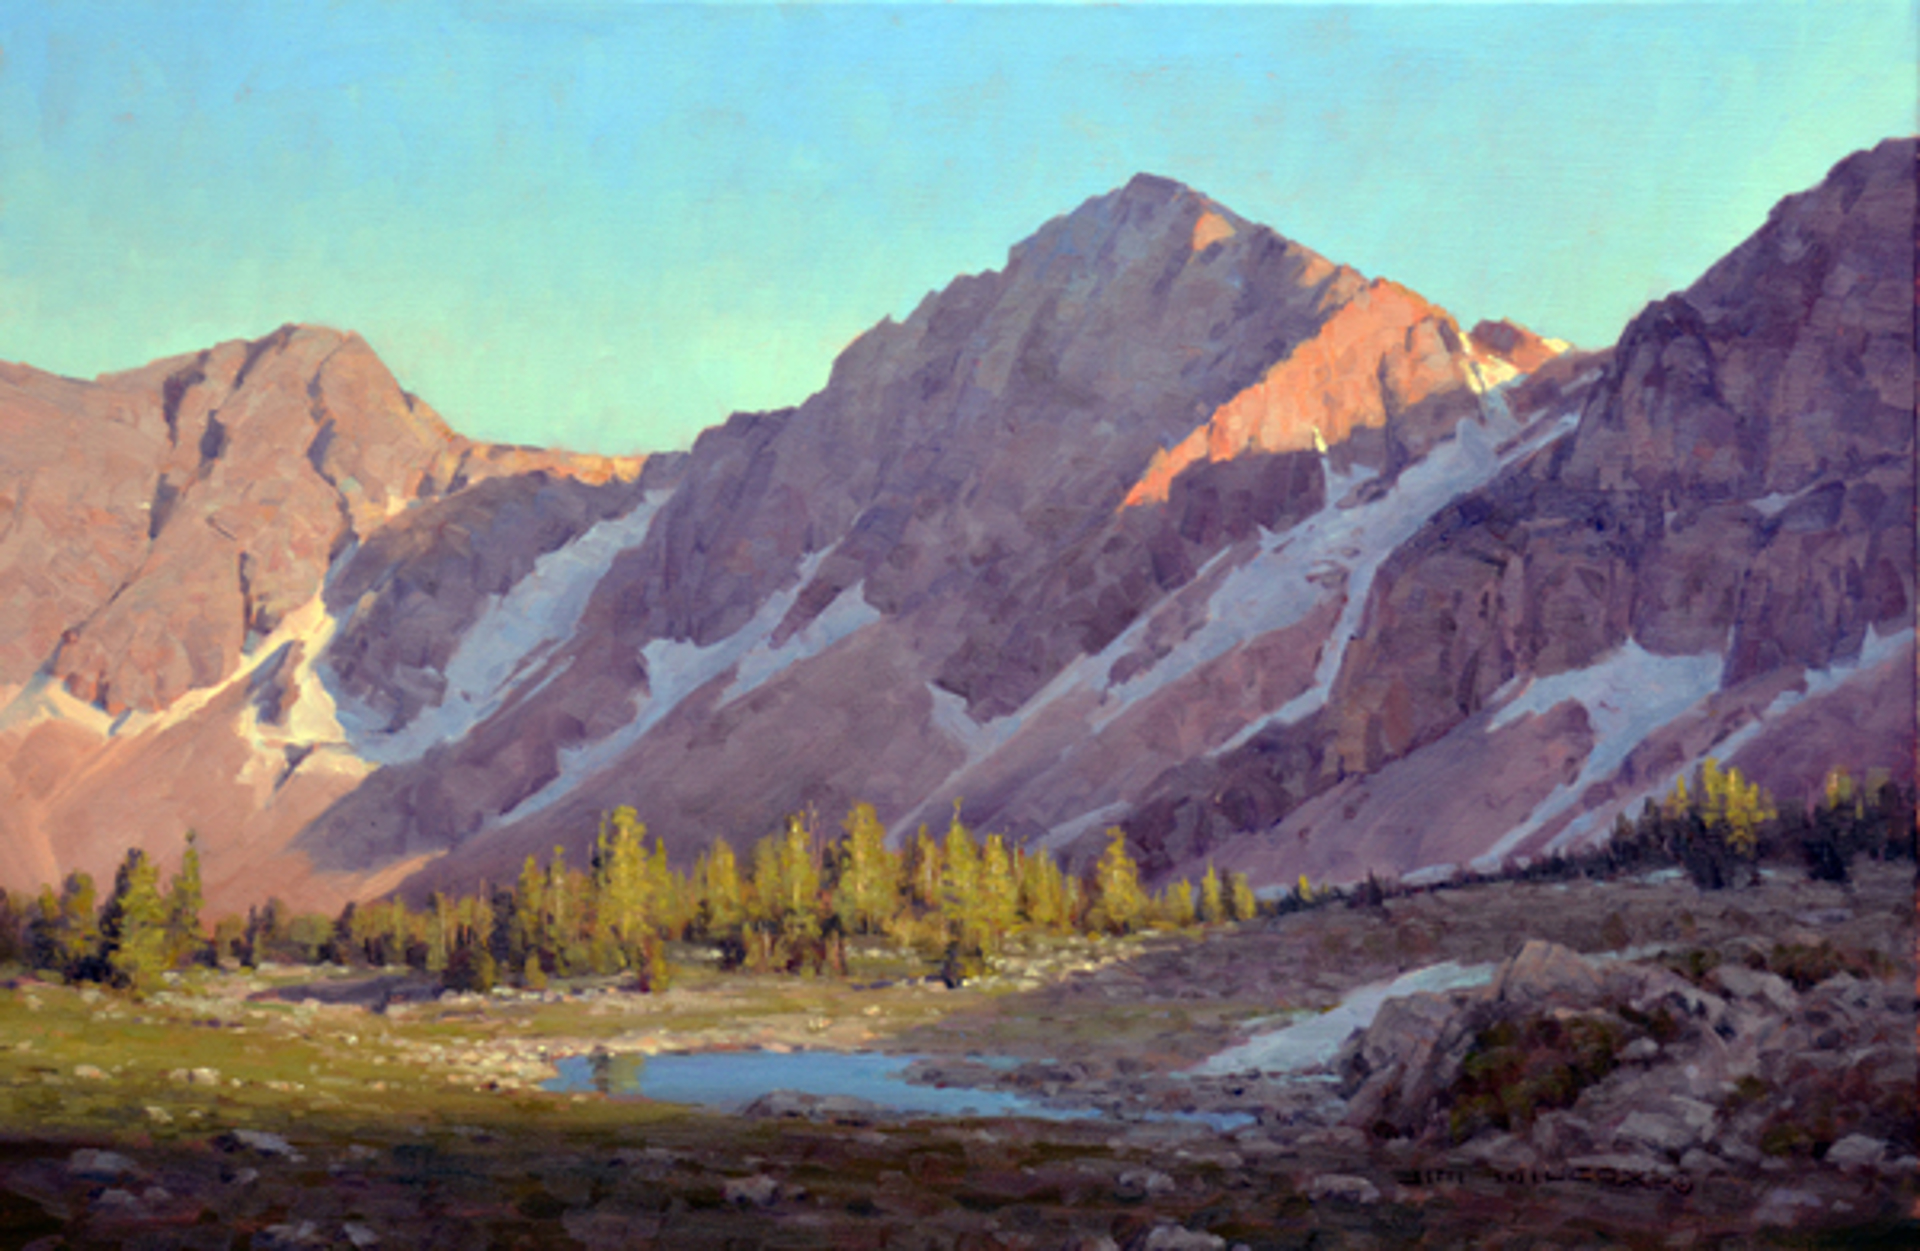 Paintbrush Divide by Jim Wilcox